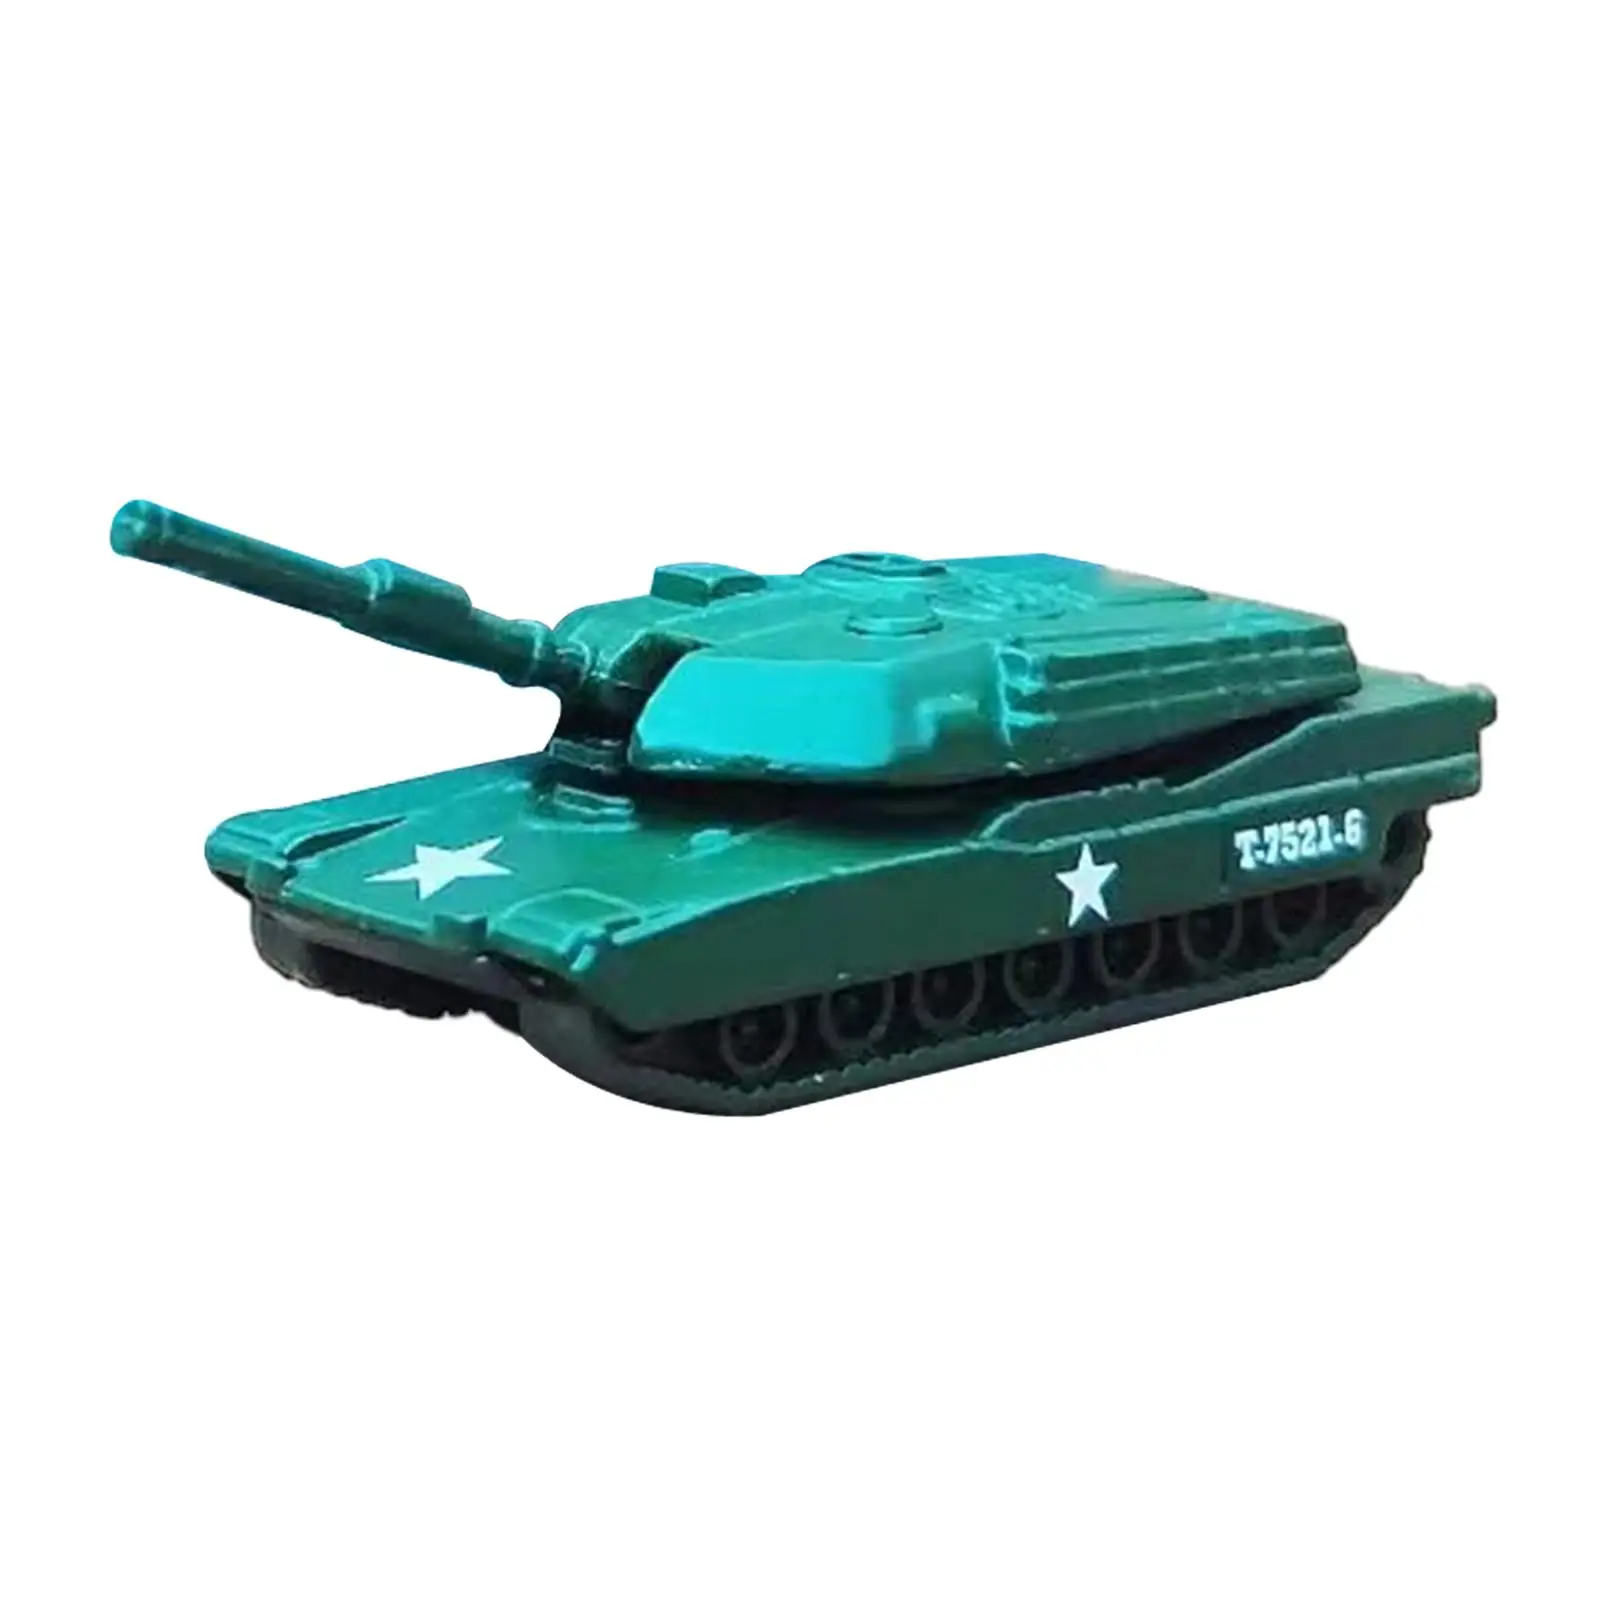 1/64 Simulation Alloy Tank Model Home Decor Collectables for Boys Men Kids